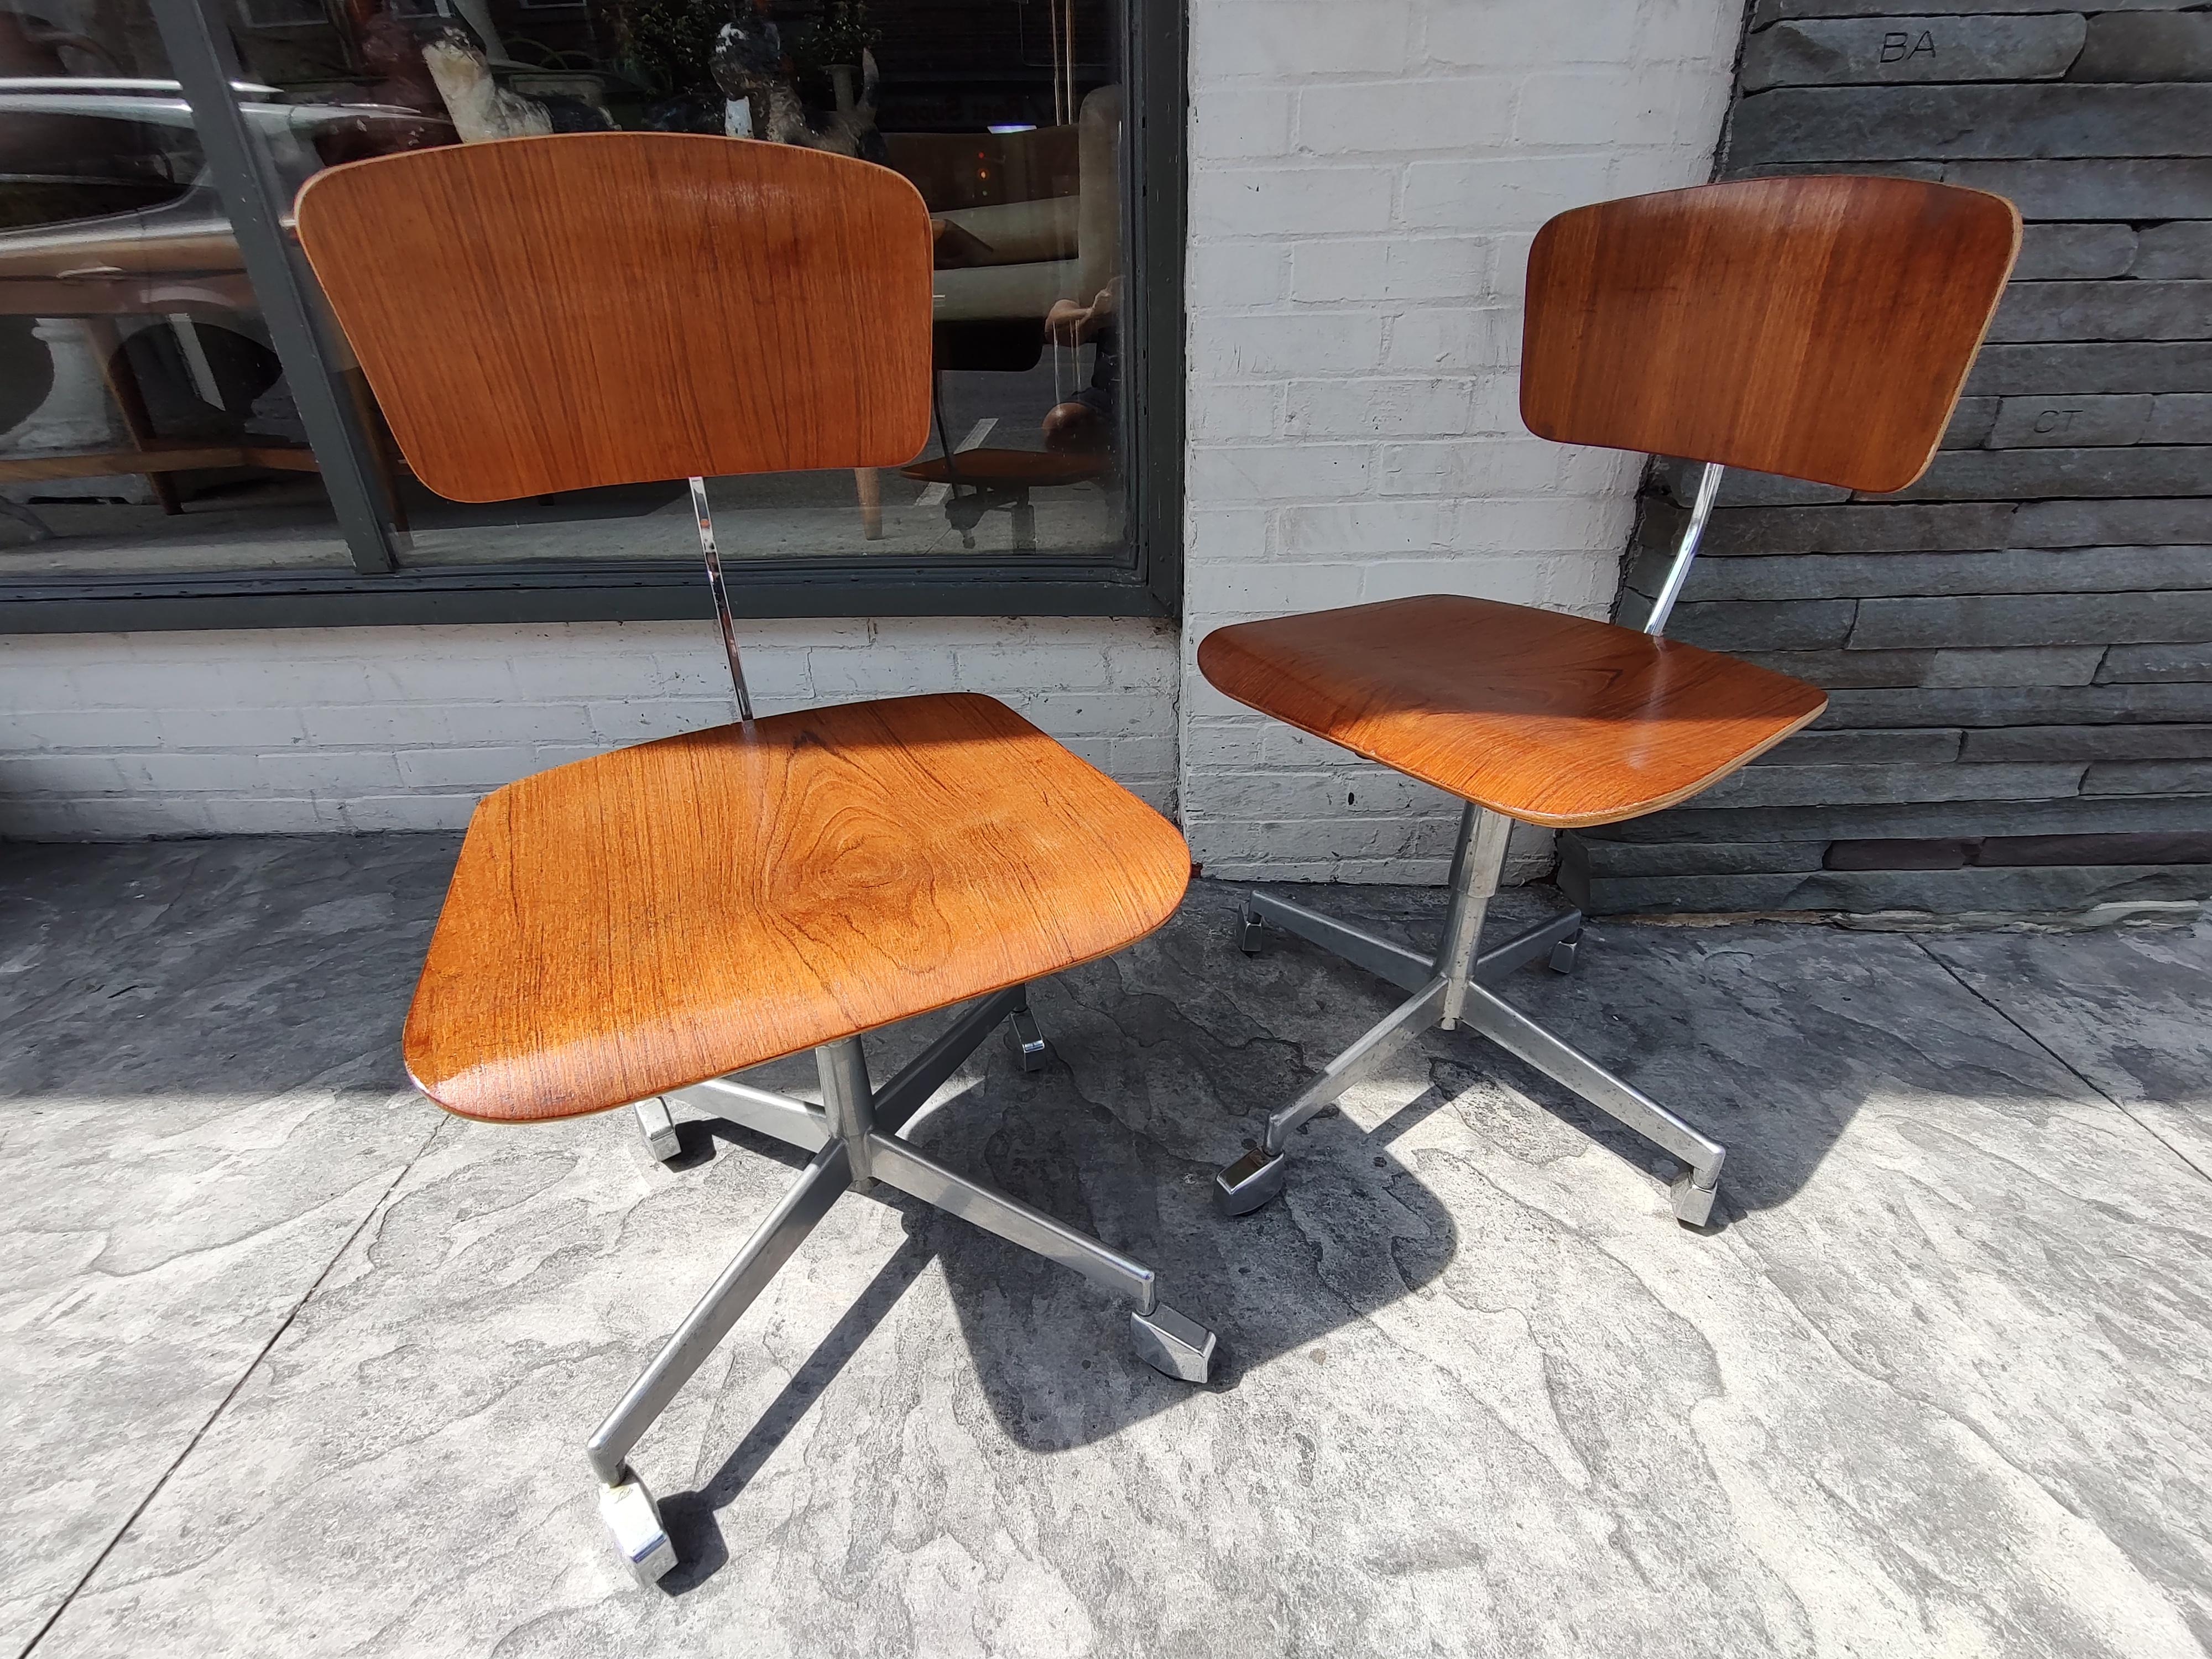 Chrome Mid-Century Modern Adjustable Desk Dining Chairs by Jorgen Rasmussen for Labofa For Sale